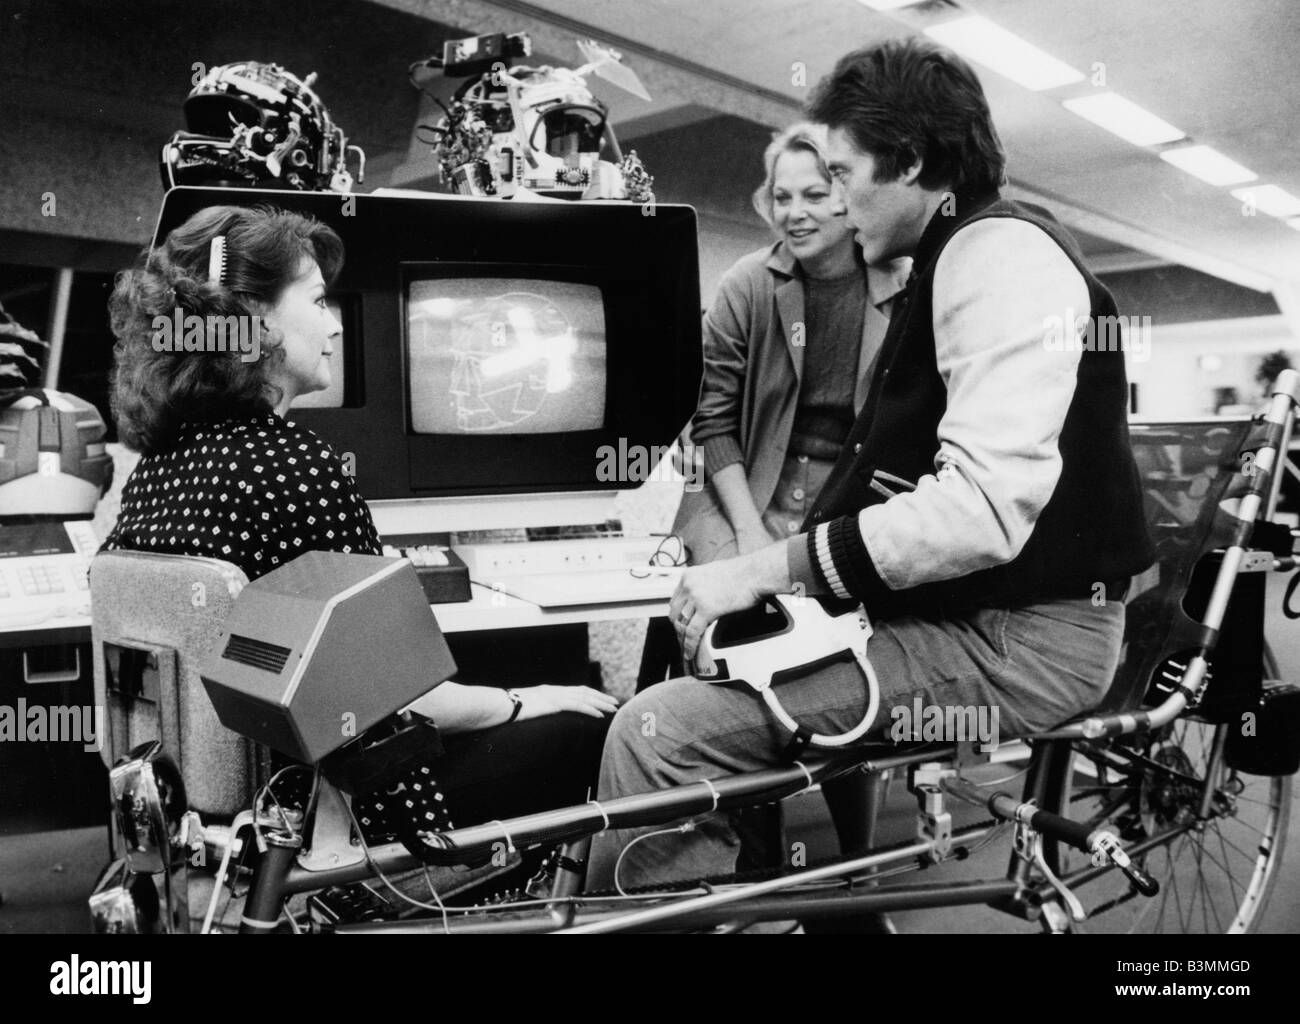 BRAINSTORM 1983 MGM film with Natalie Wood at left and Christopher Walken Stock Photo